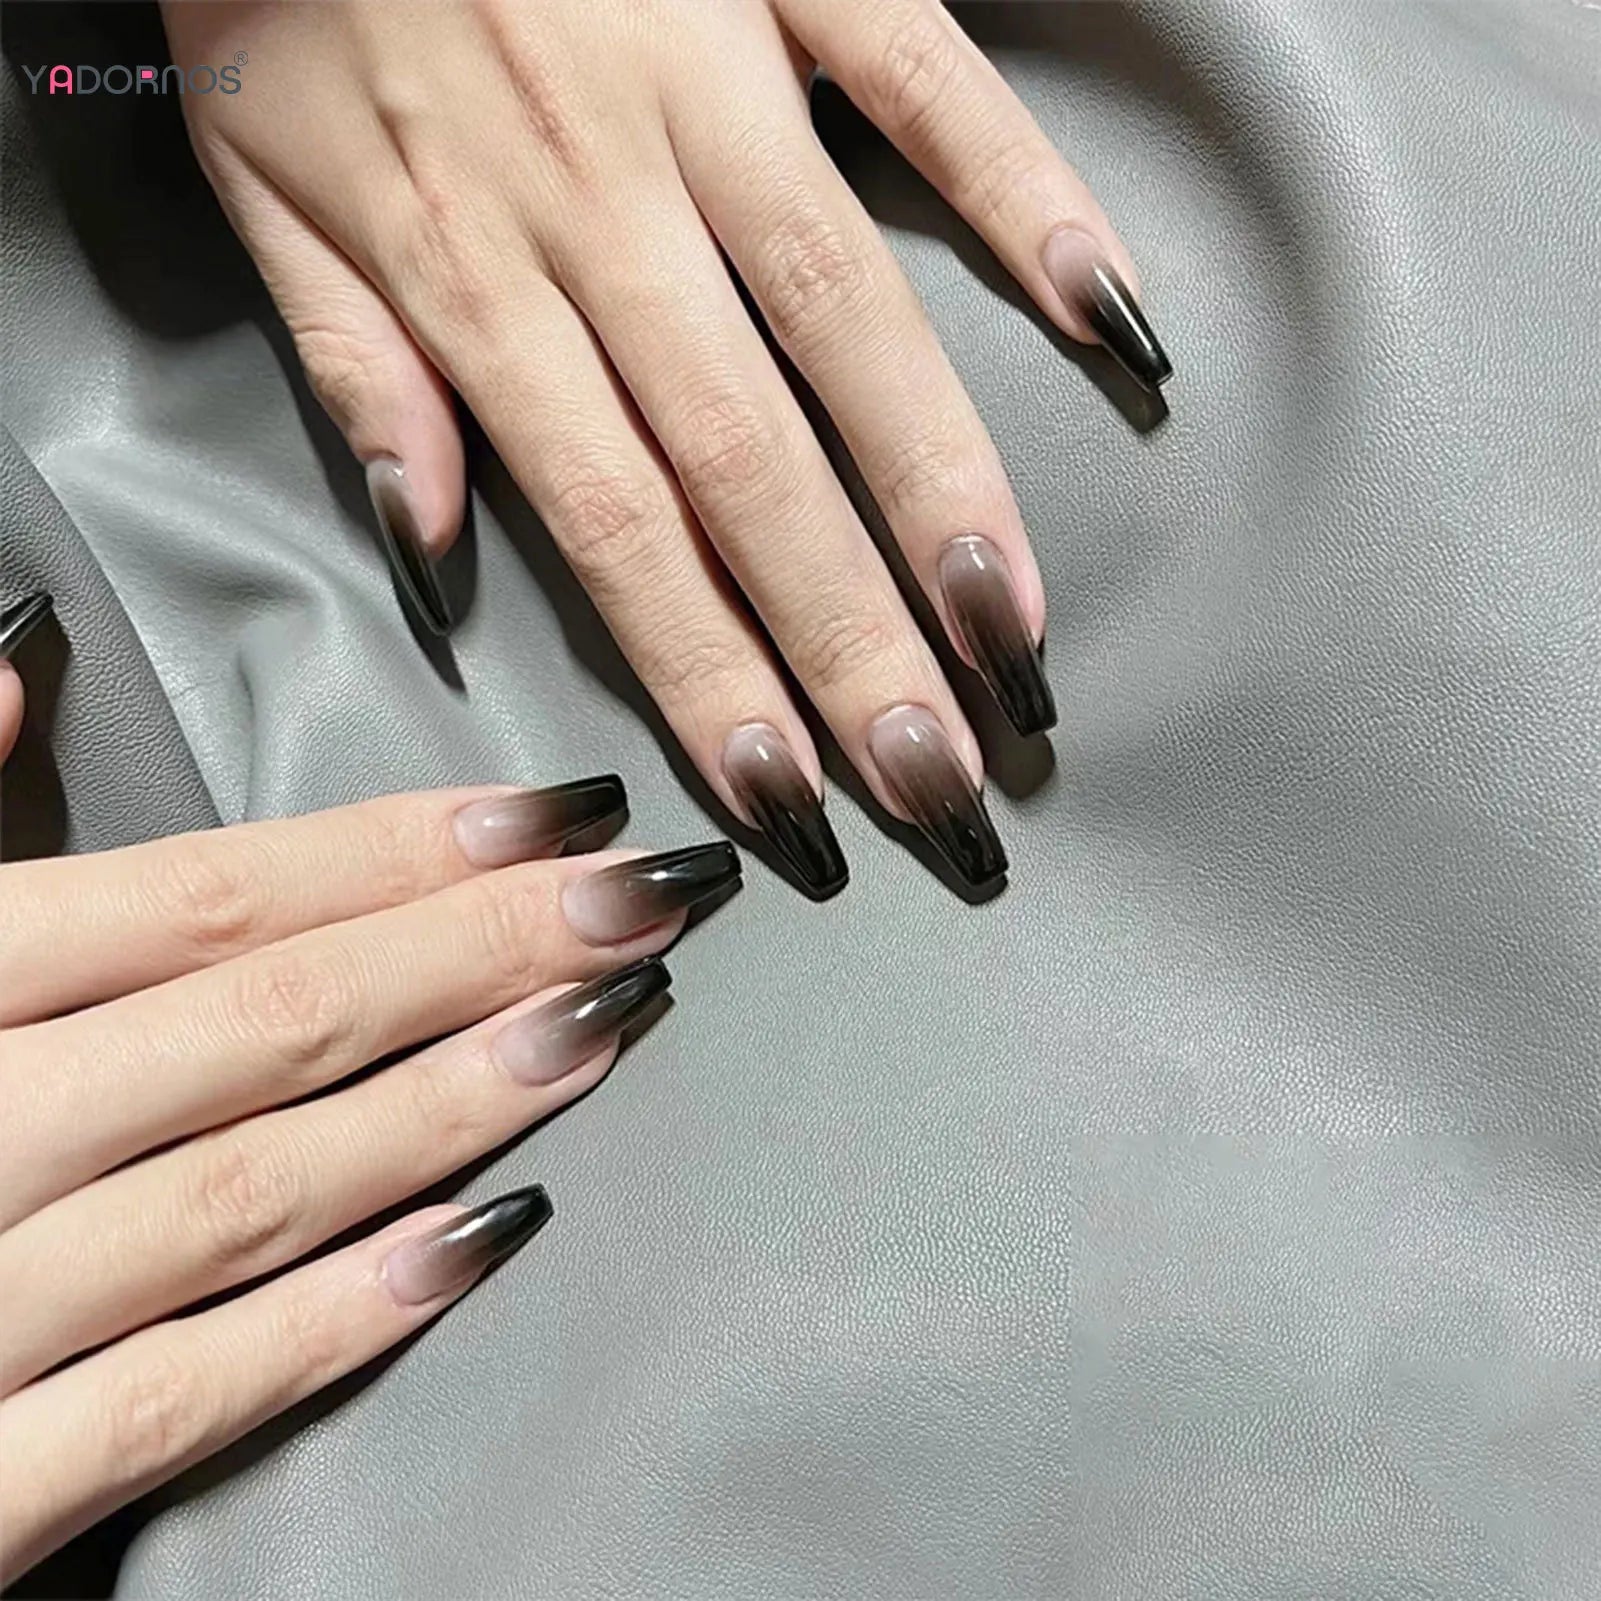 Gradient Black Fake Nails Long Ballerina Nails With Lim Simple Full Cover False Nails Tips For Women Girls Diy Manicure 24st